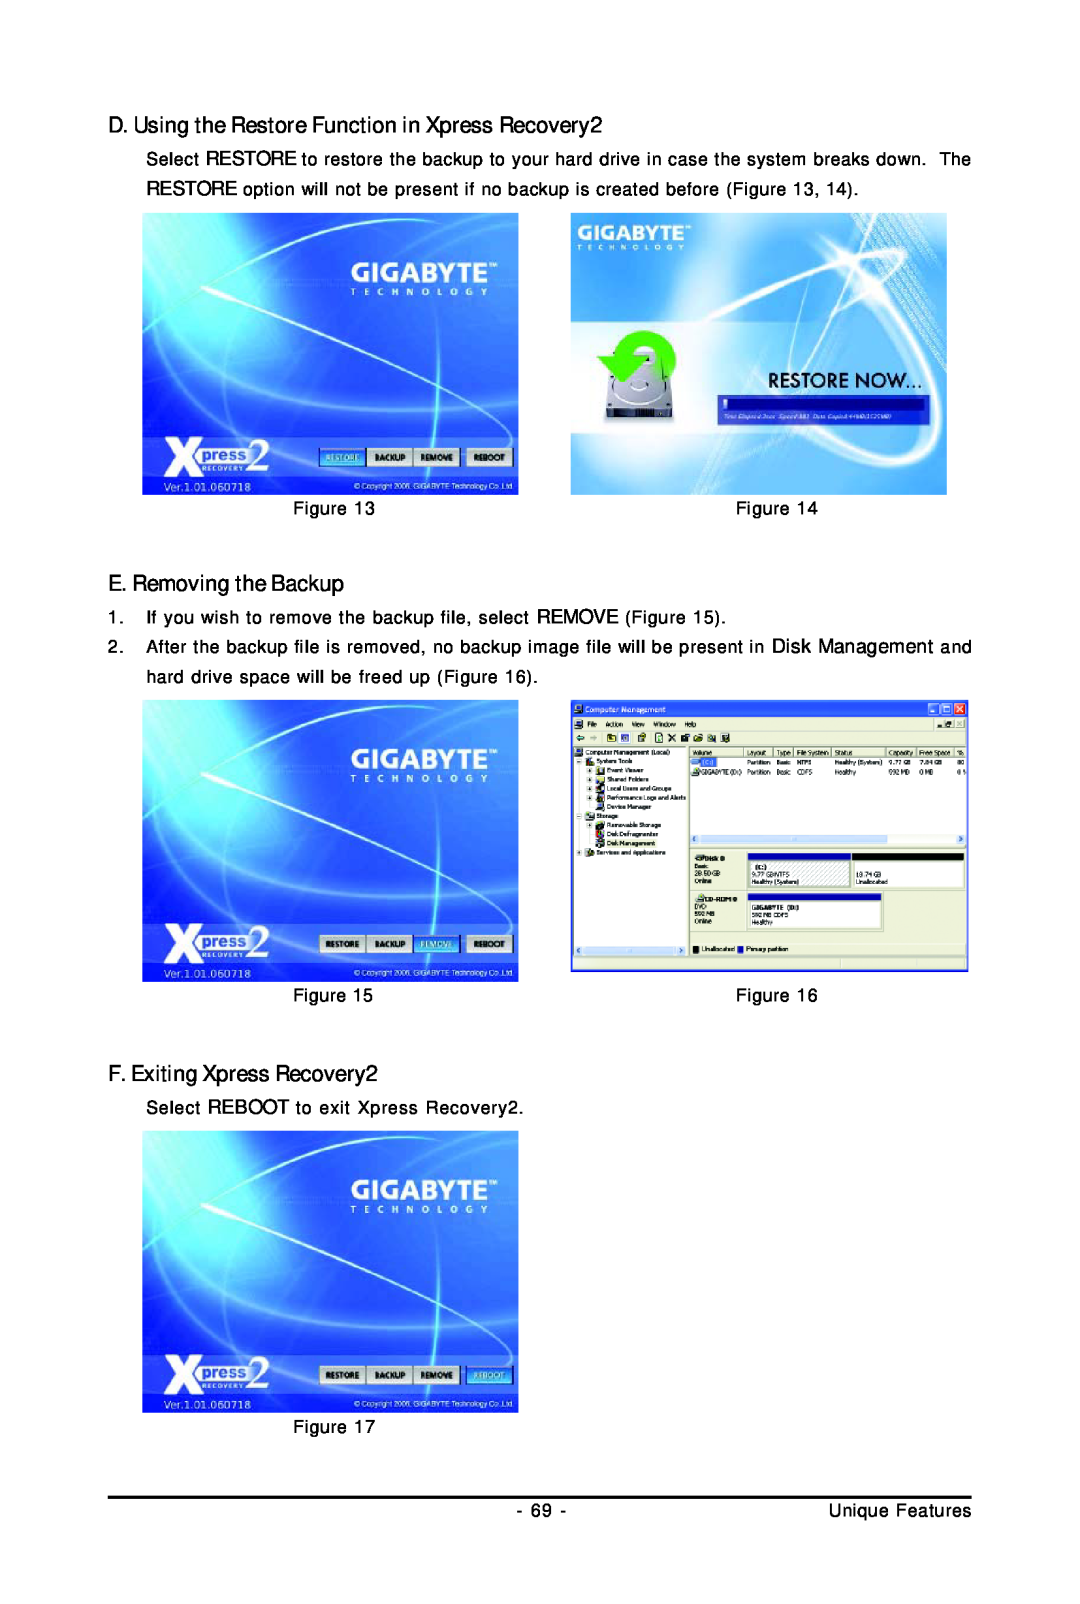 Gigabyte GA-EP45-UD3LR user manual D. Using the Restore Function in Xpress Recovery2, E. Removing the Backup 